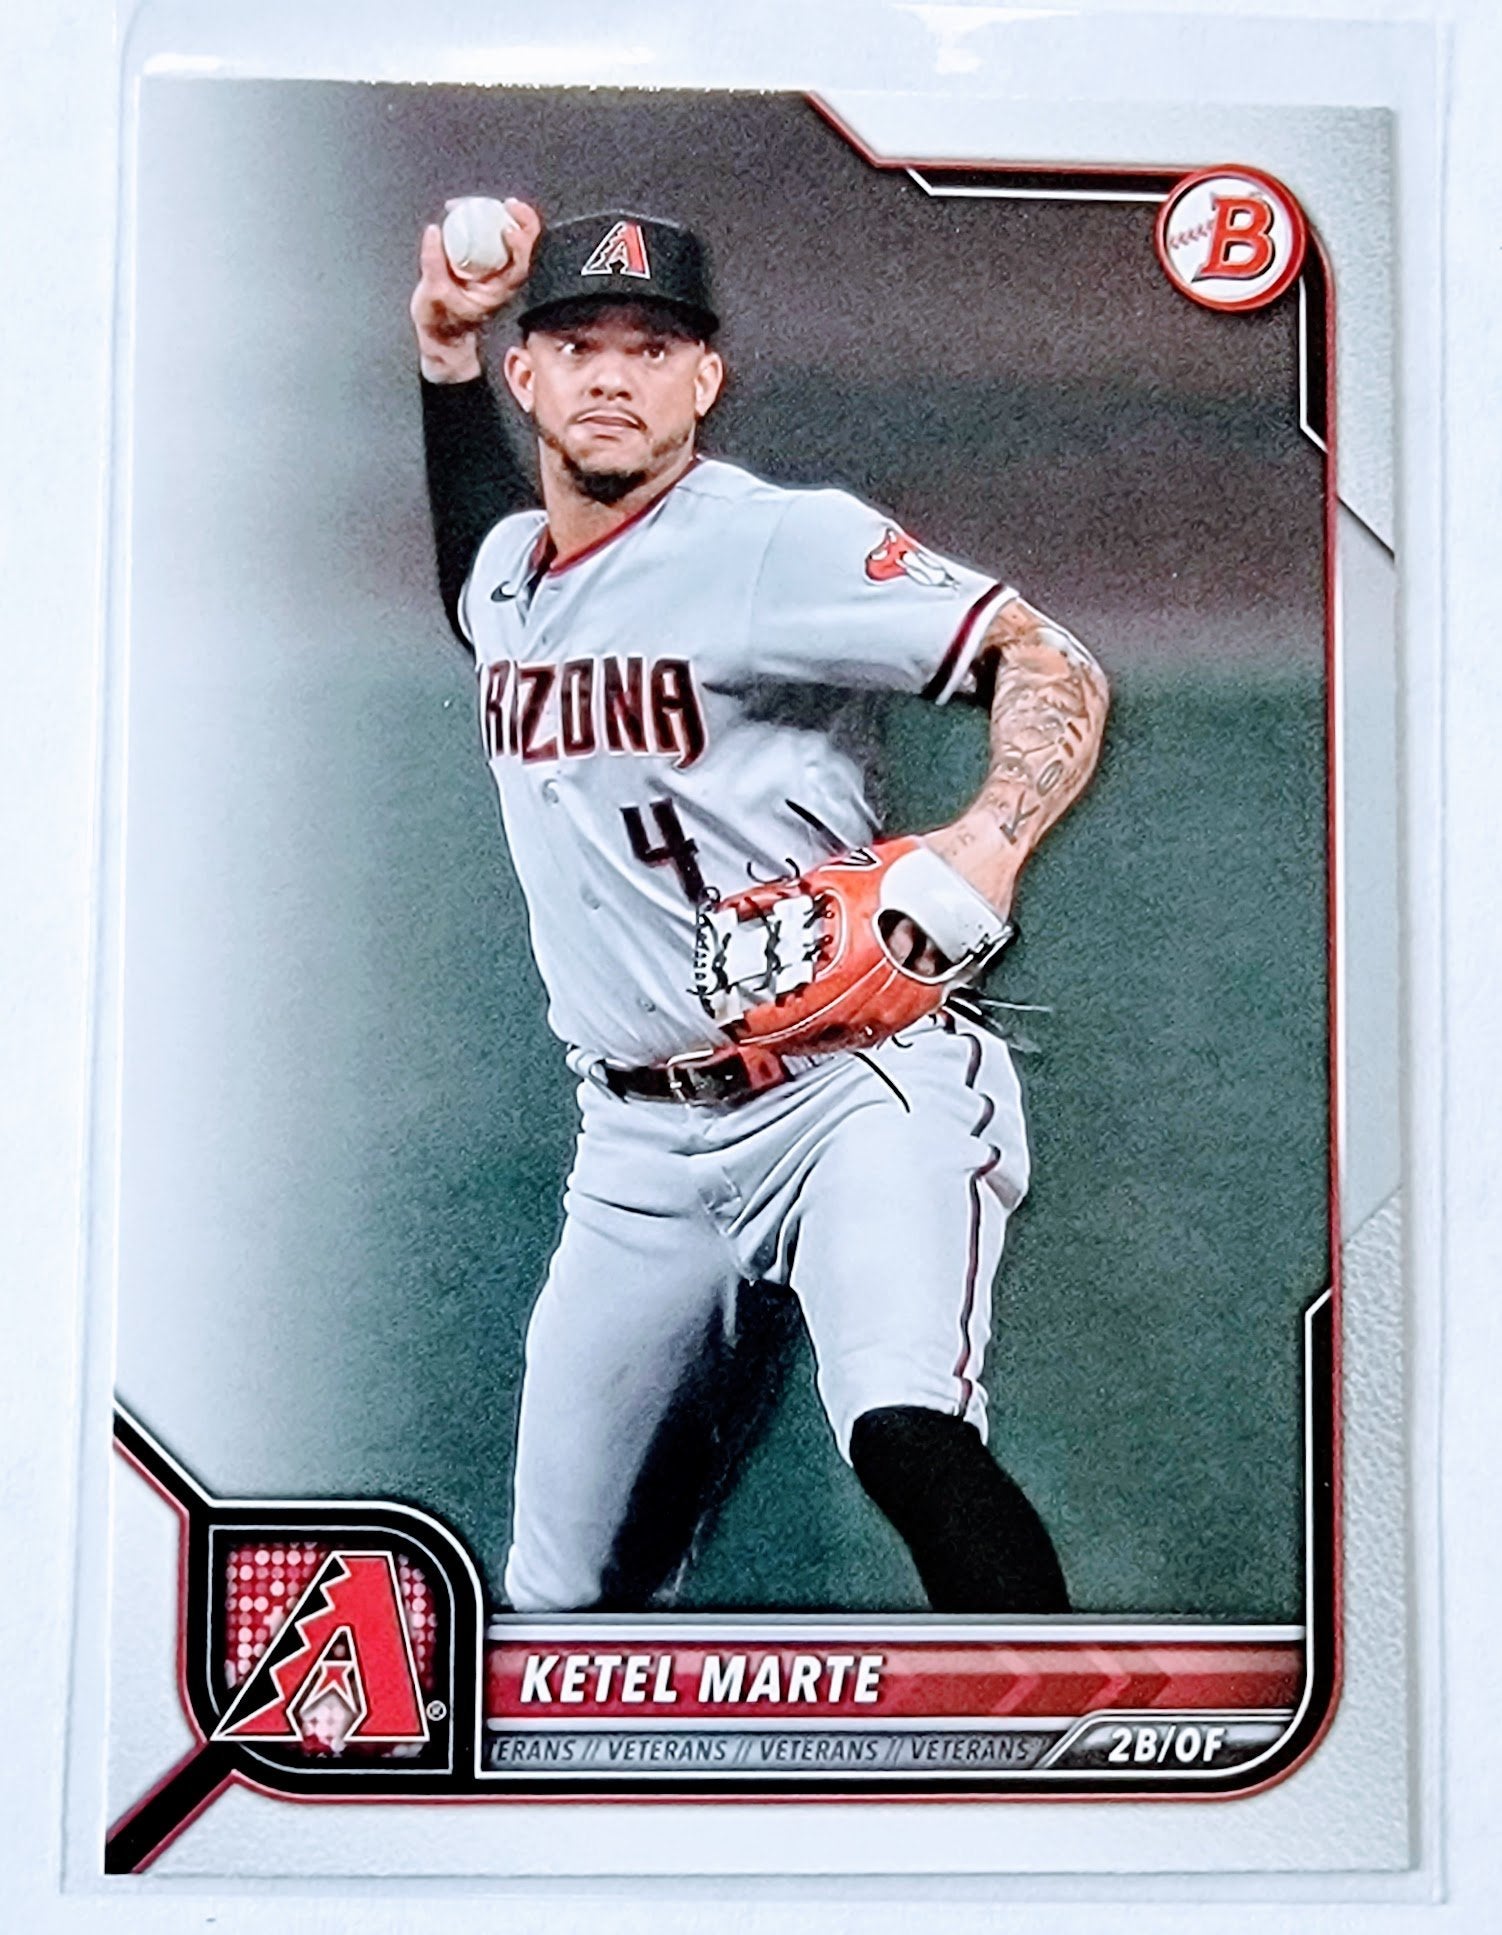 2022 Bowman Ketel Marte Baseball Trading Card SMCB1 simple Xclusive Collectibles   